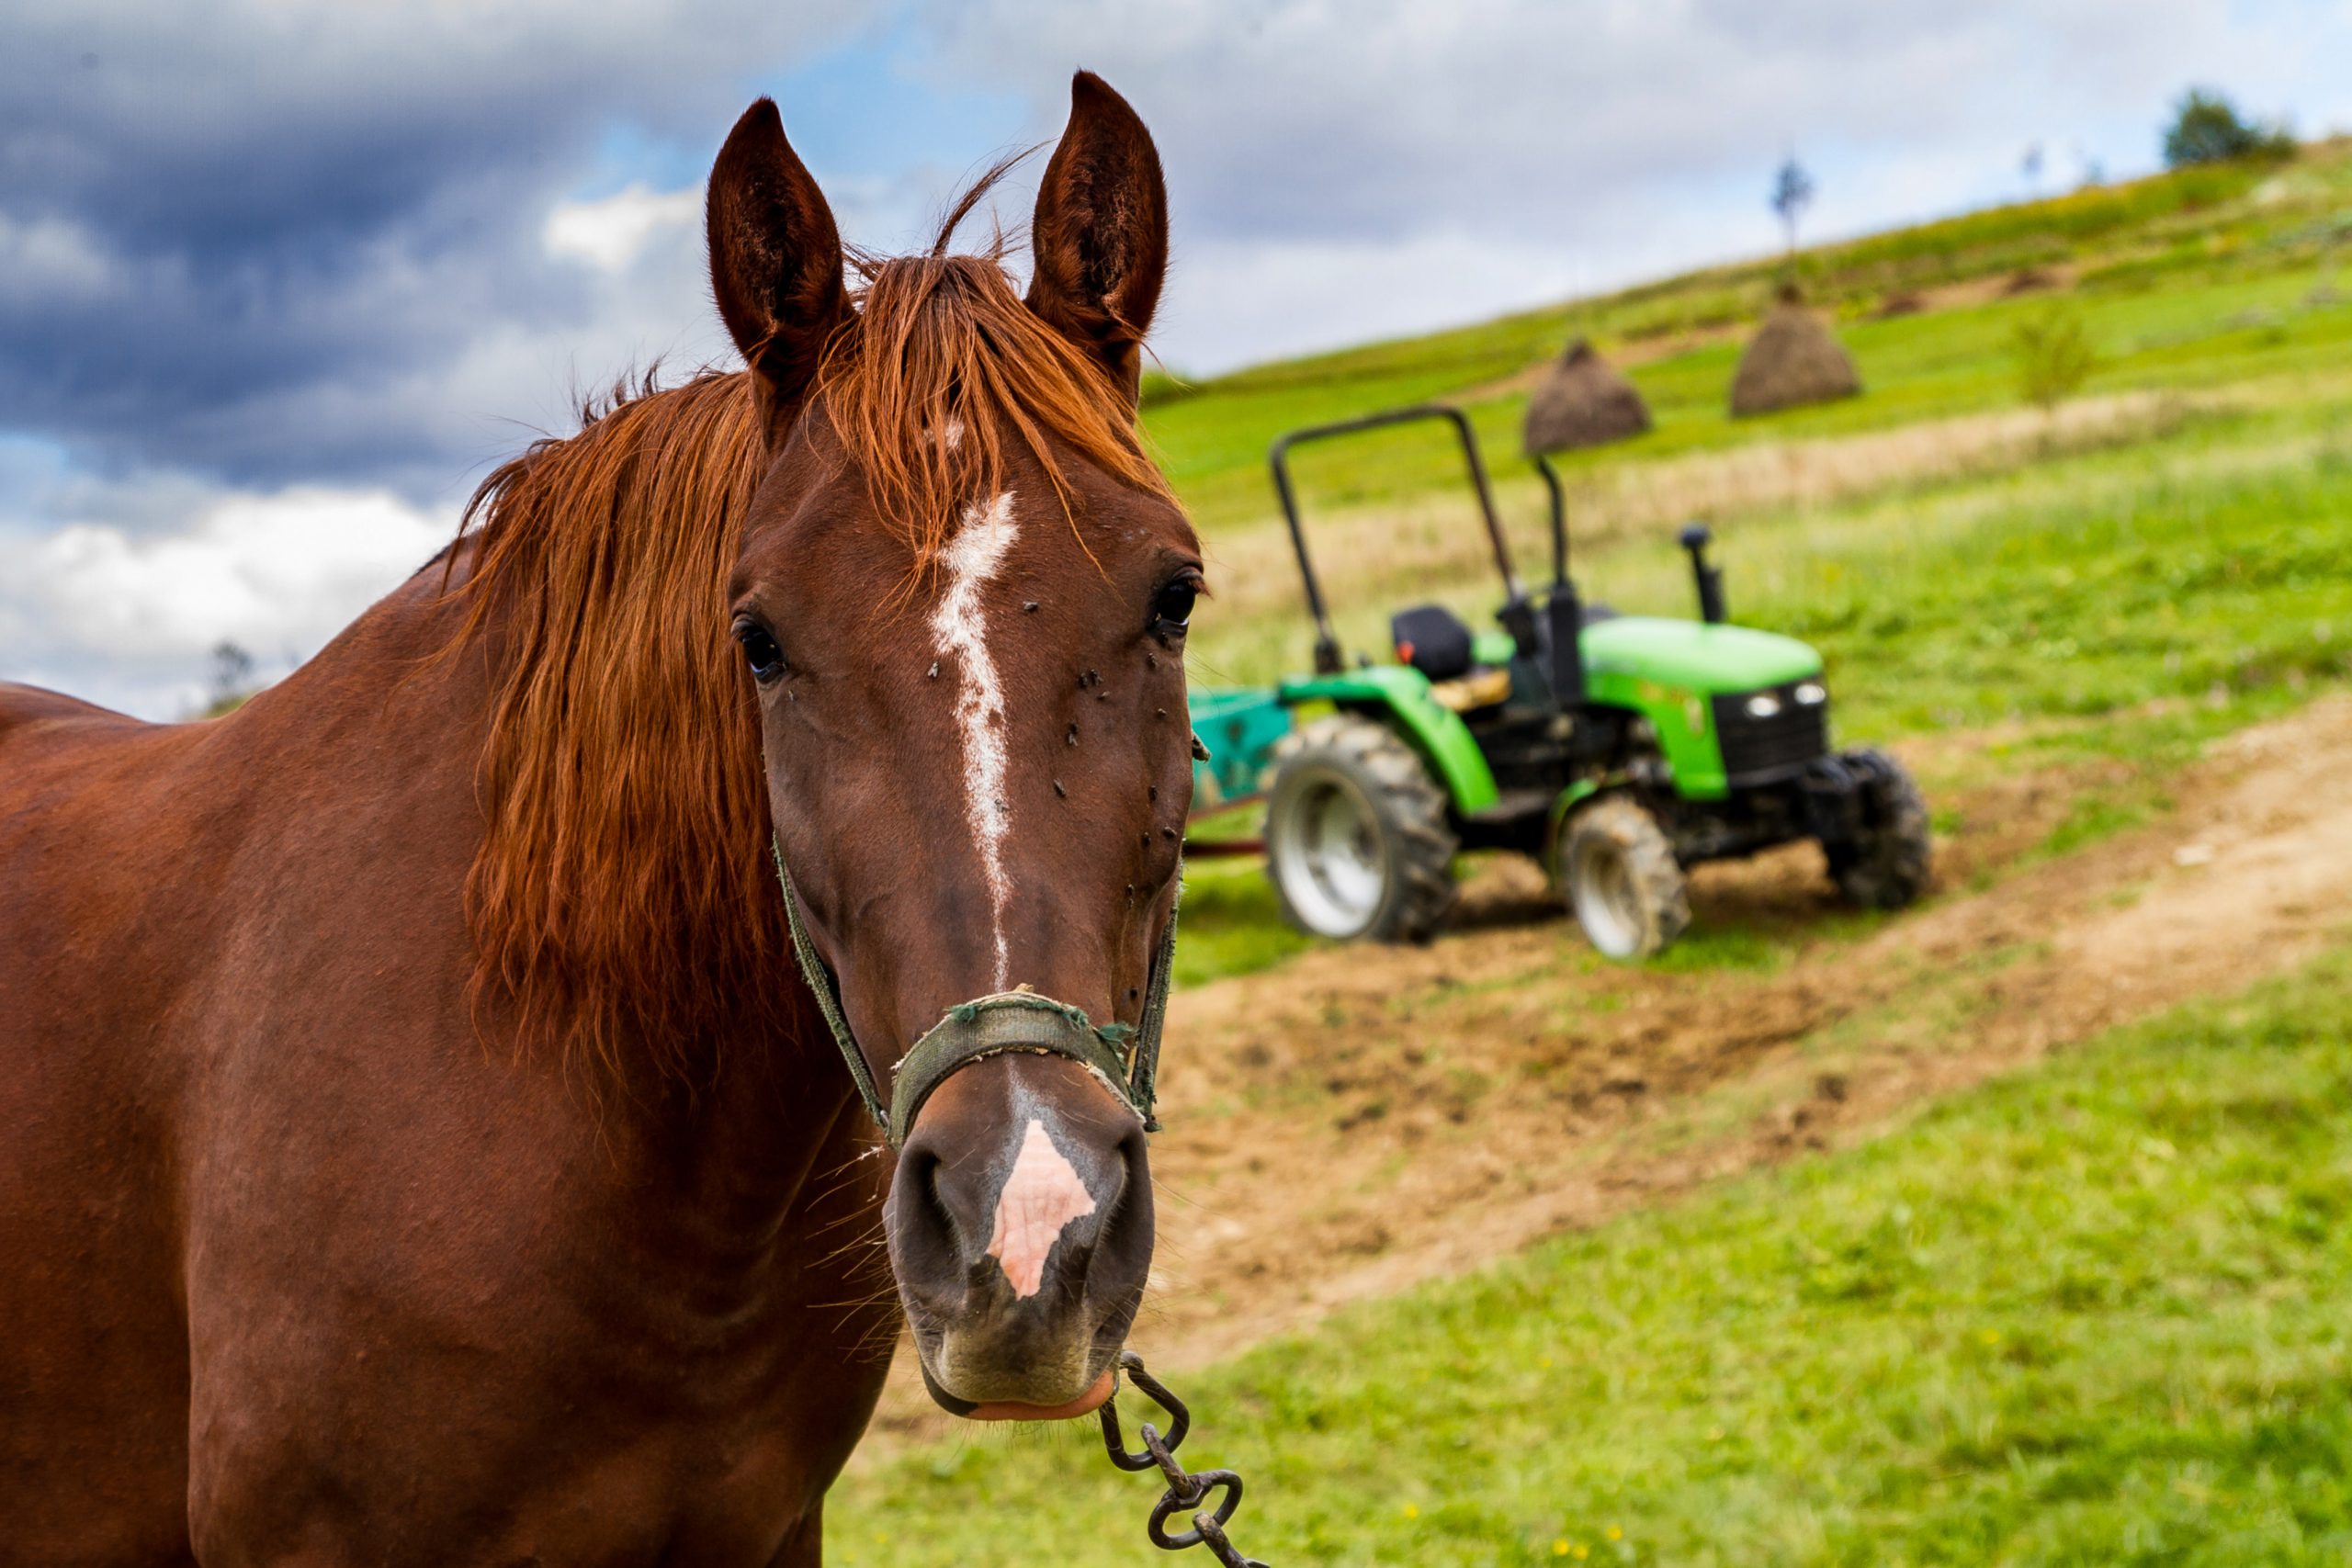 Horse and a small green tractor